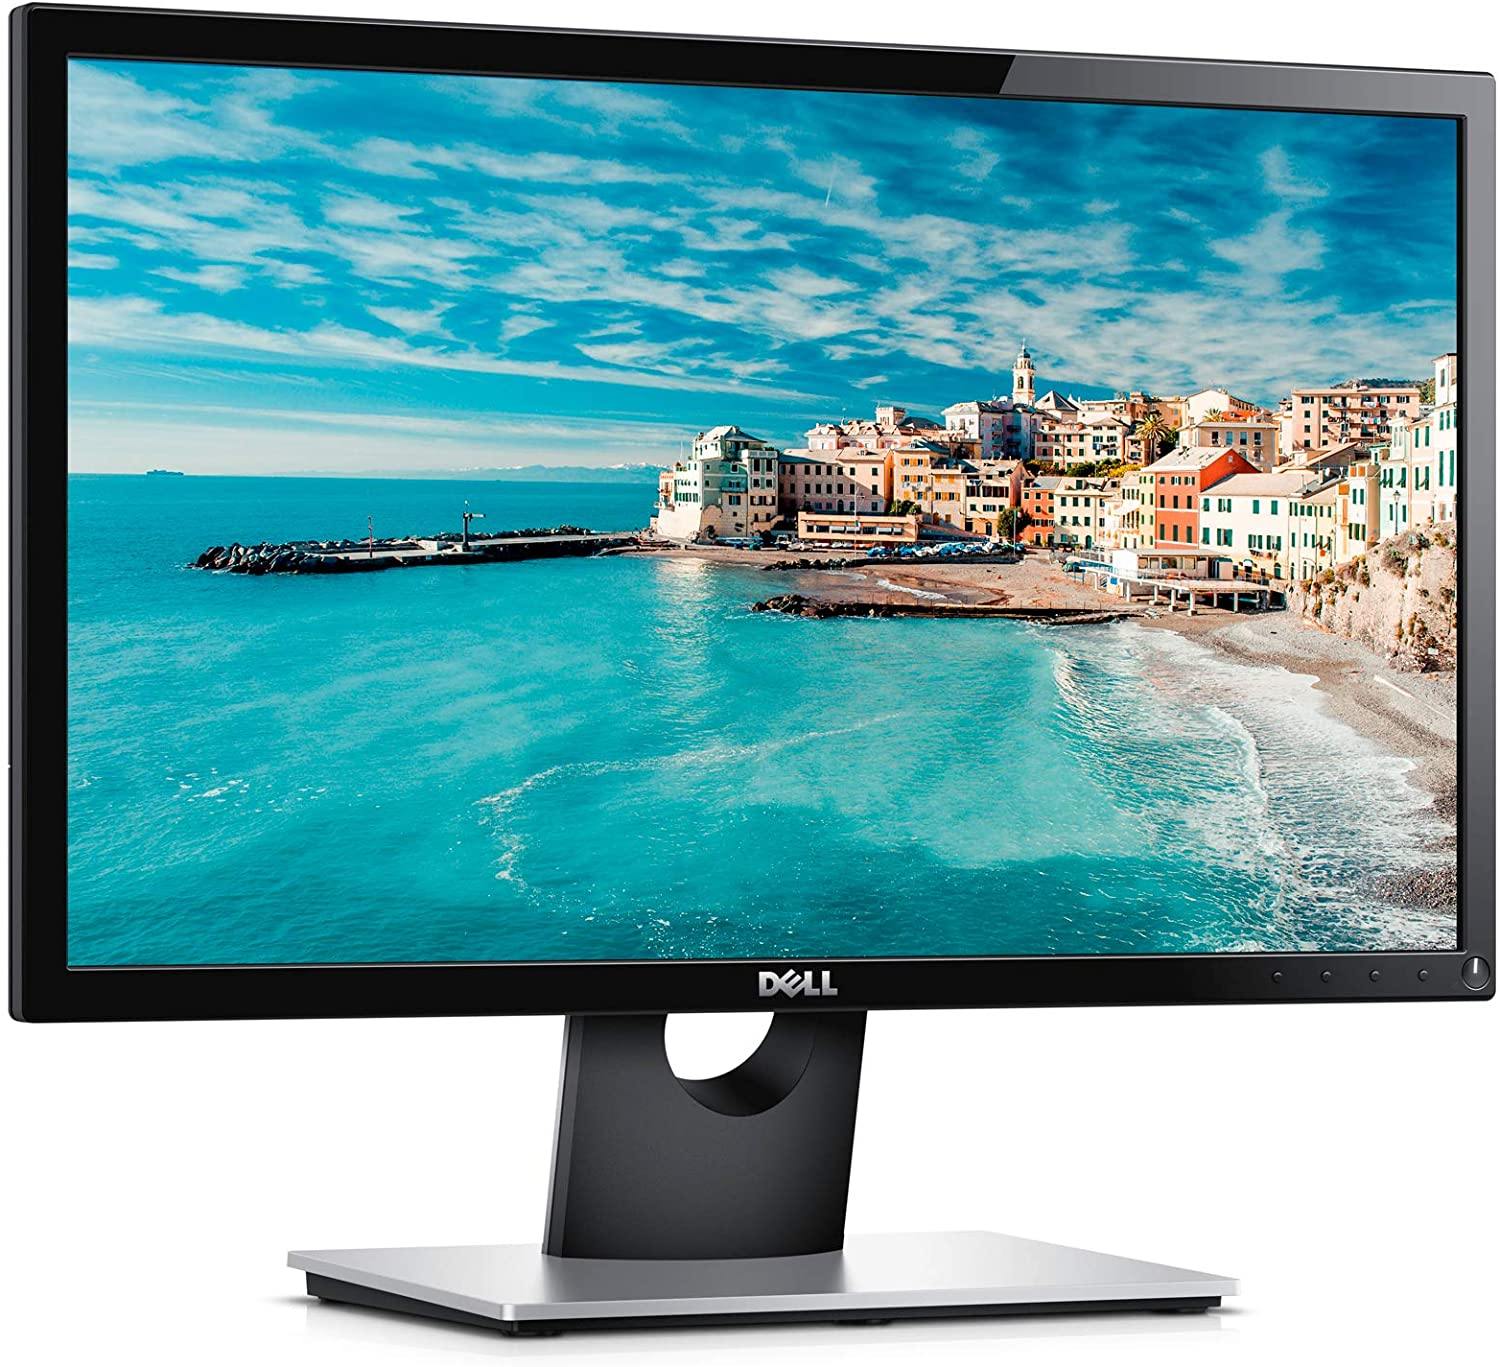 How To Get Dell Monitor Out Of Power Save Mode